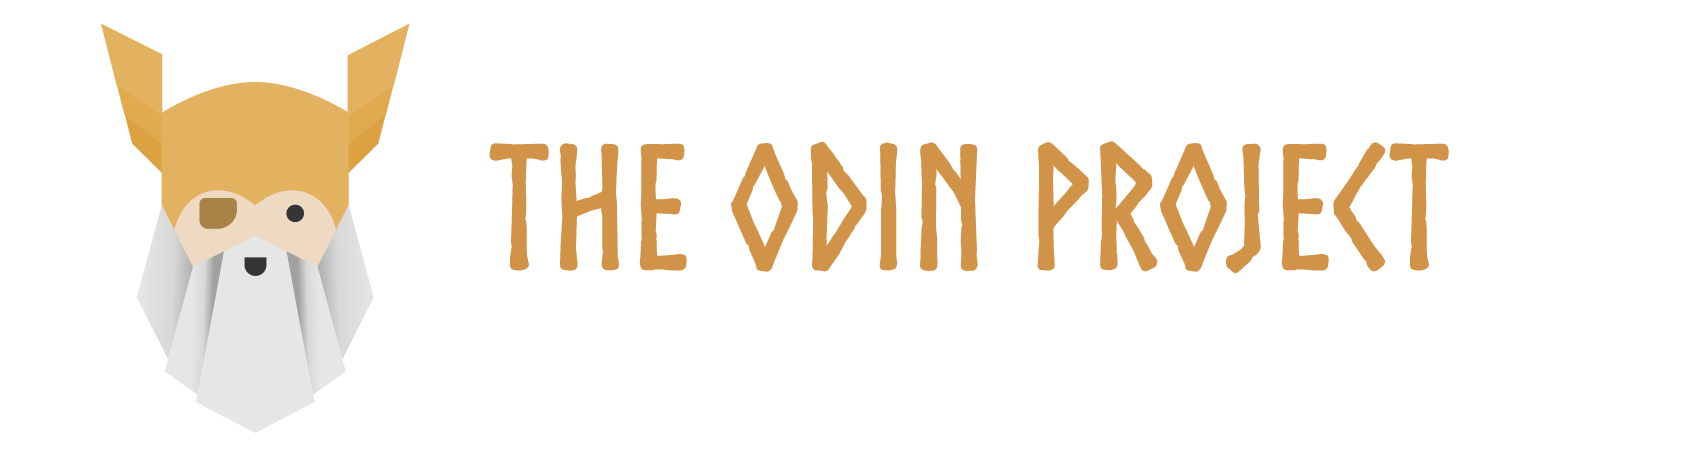 the odion project logo